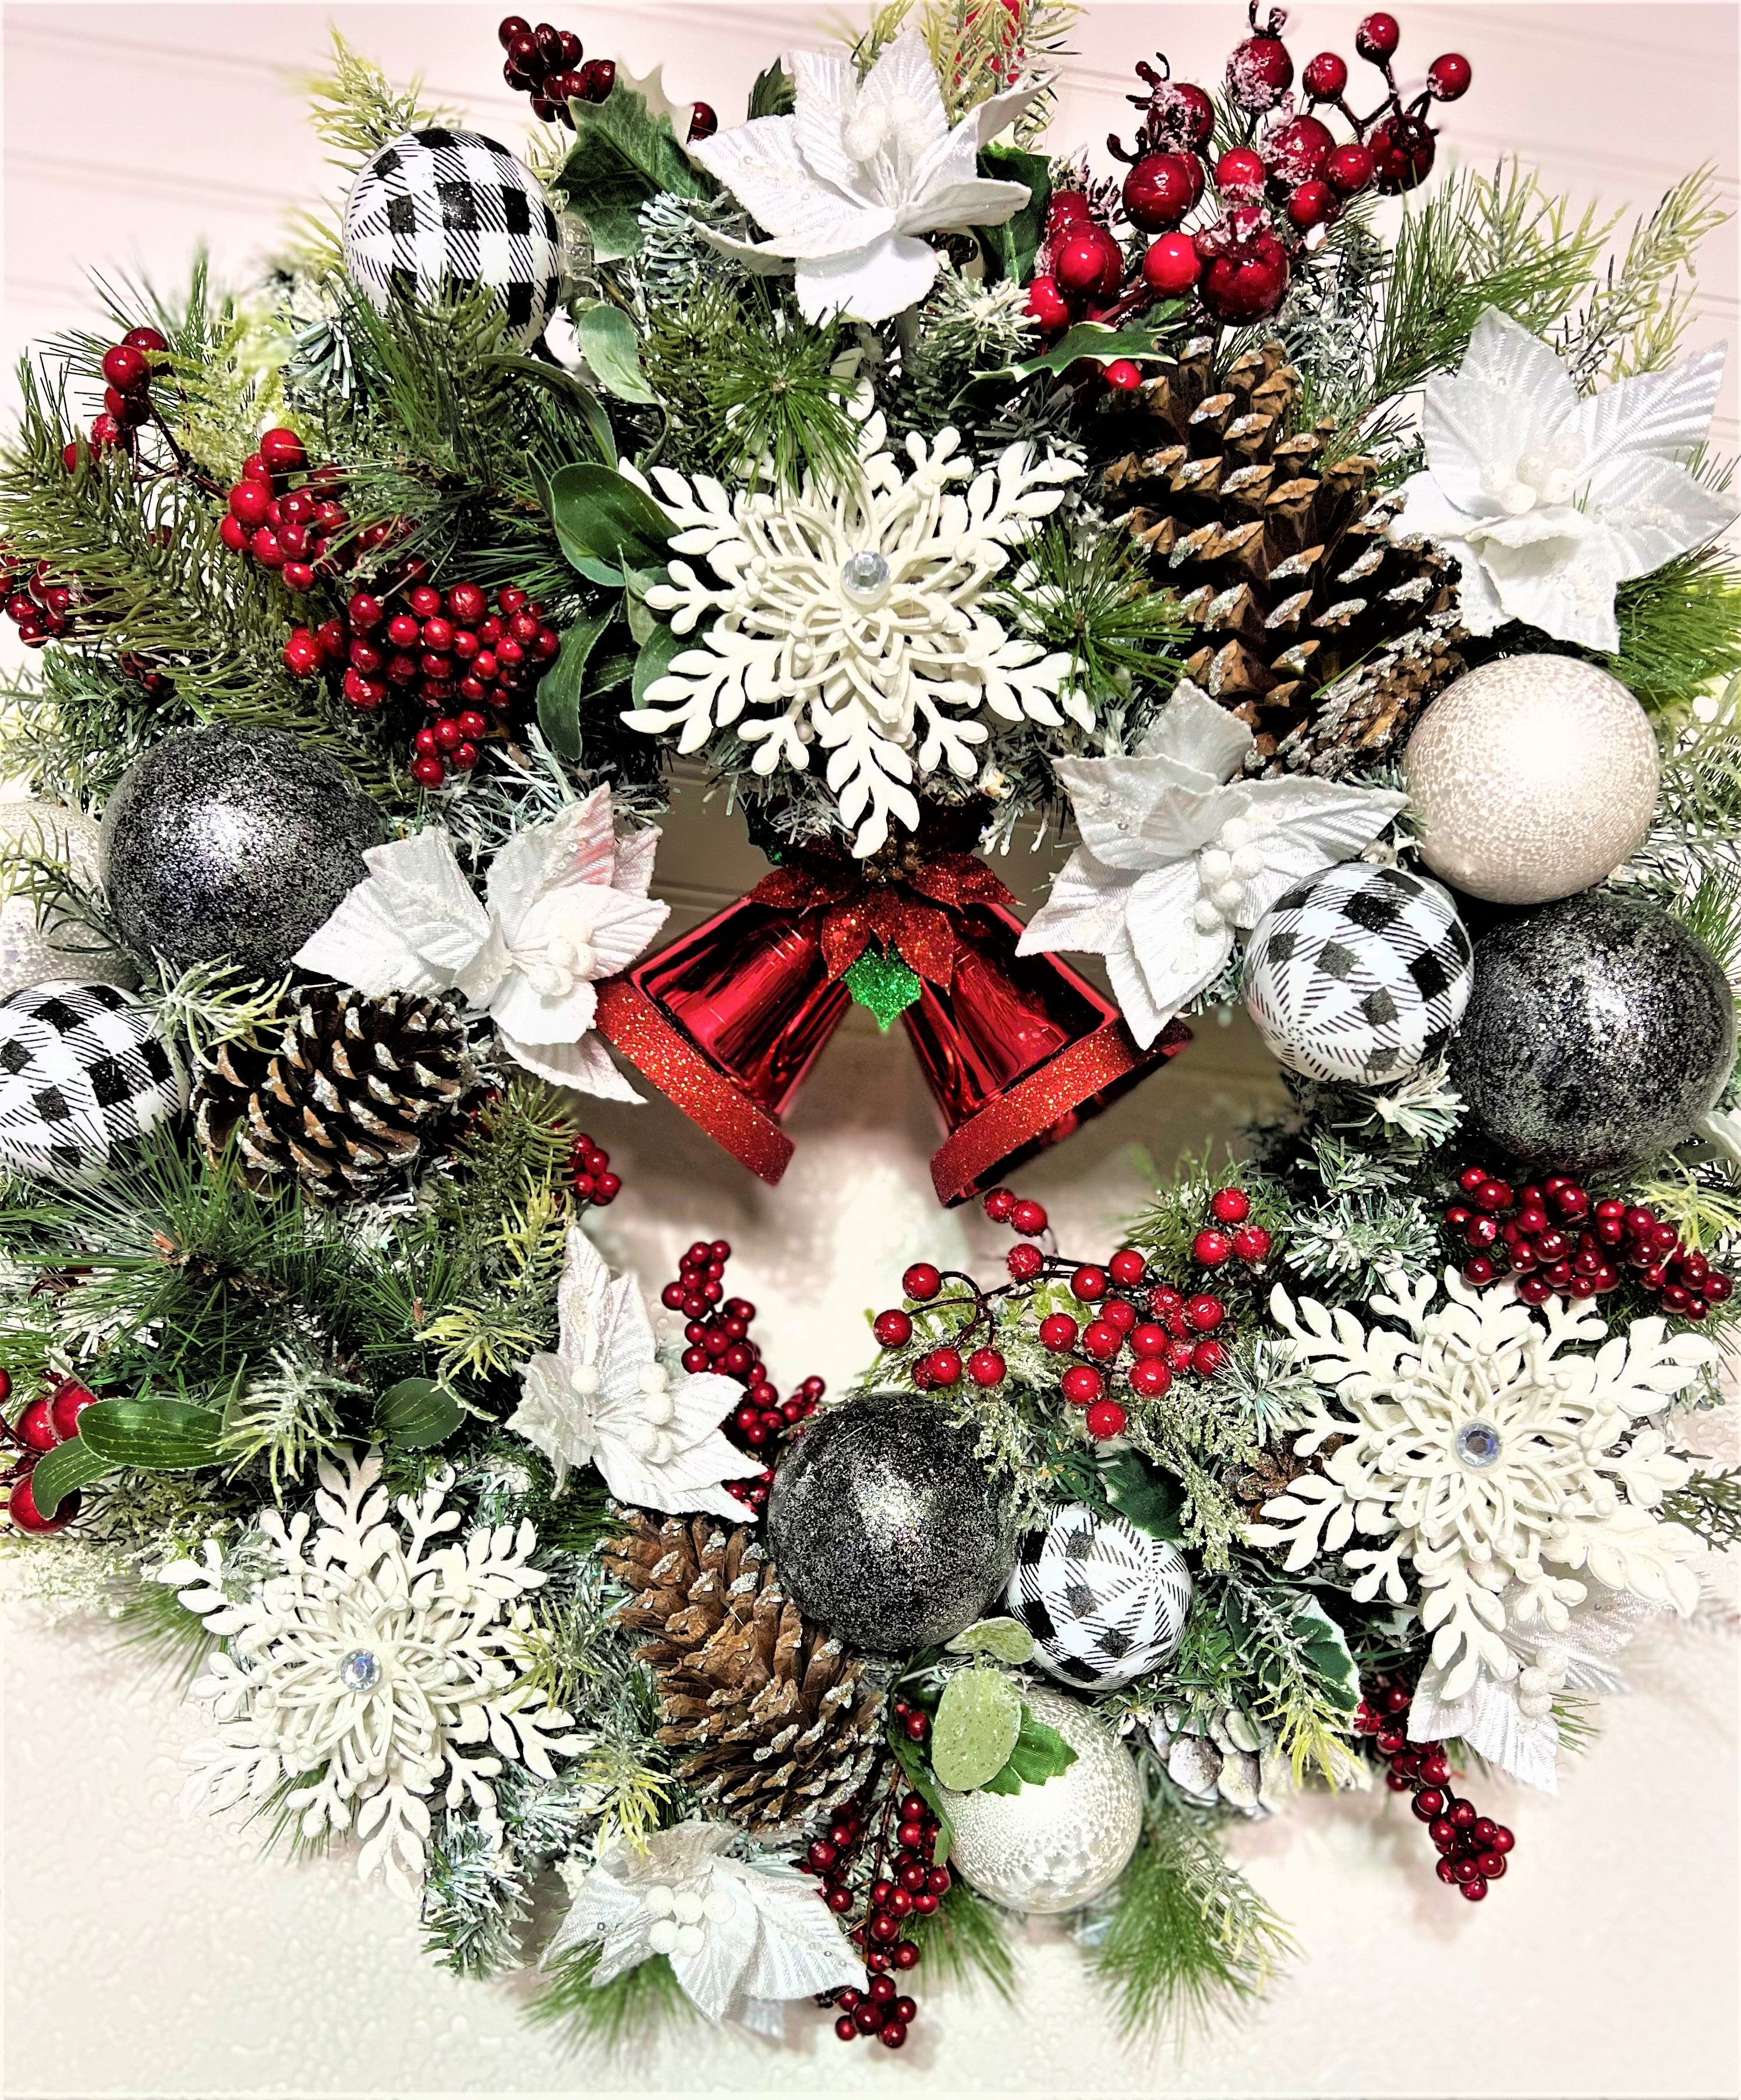 Ring The Bell Christmas Wreath 25"